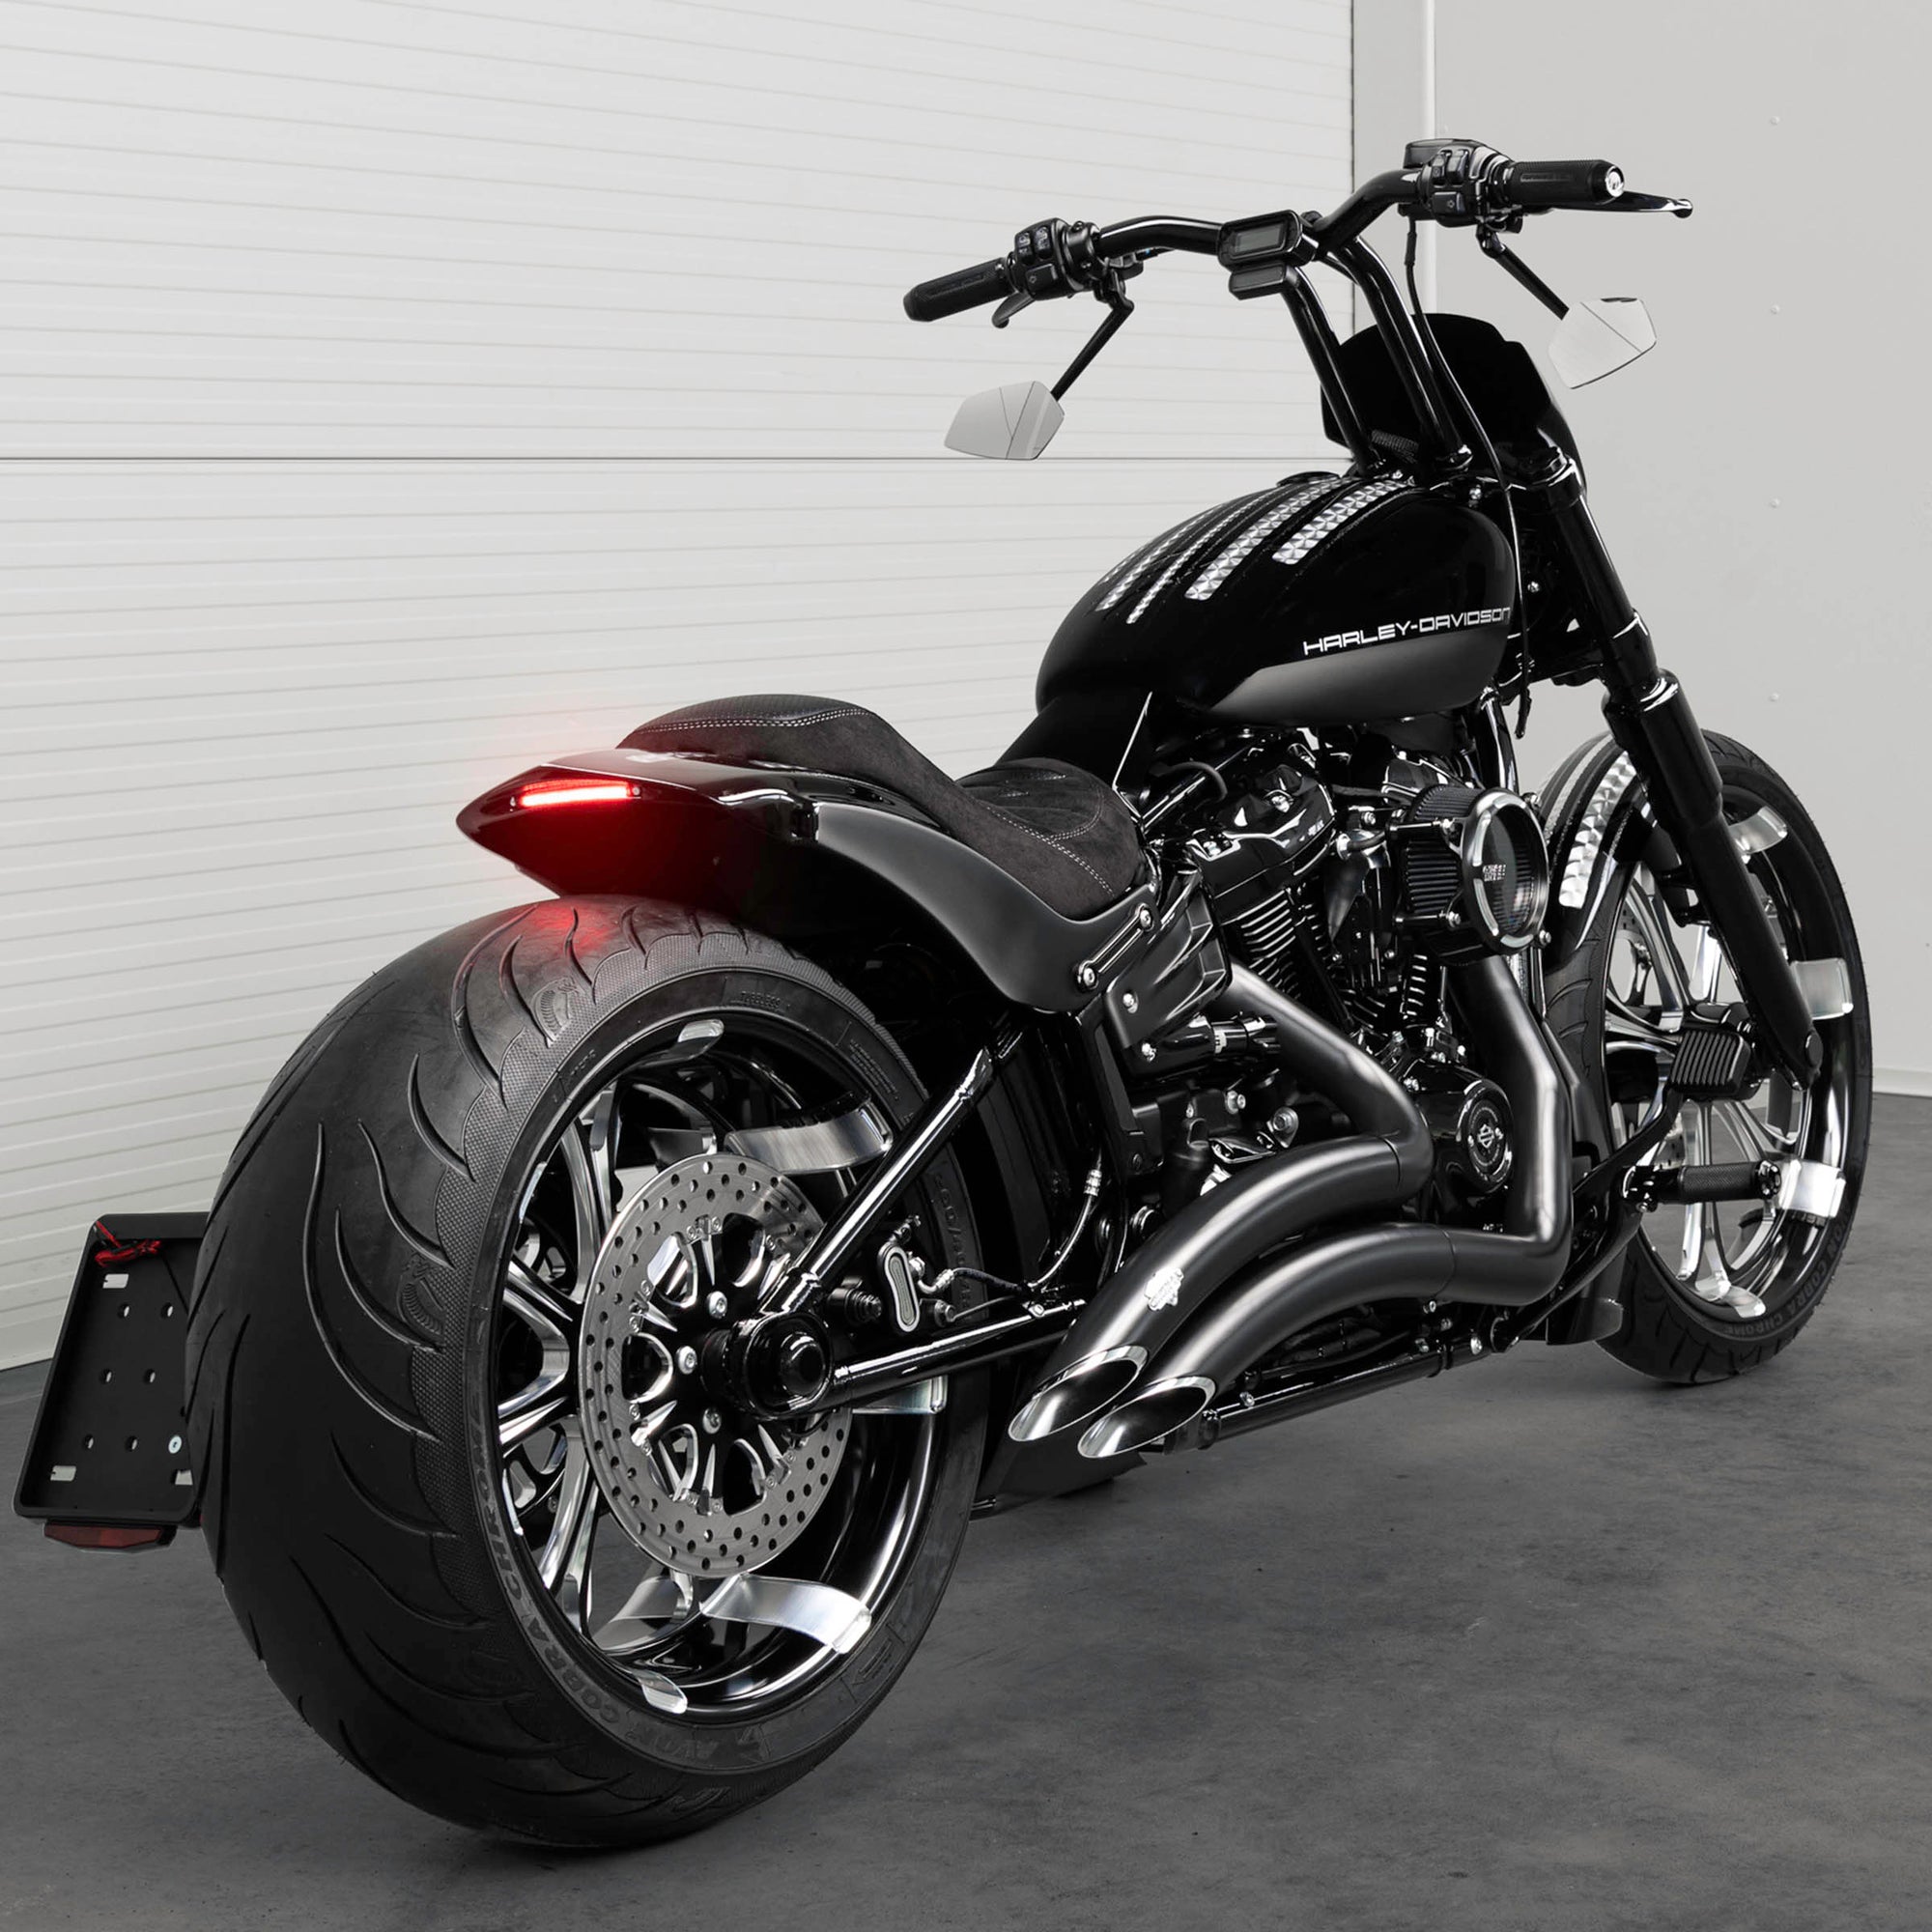 Harley Davidson motorcycle with Killer Custom parts from the rear in a white modern bike shop